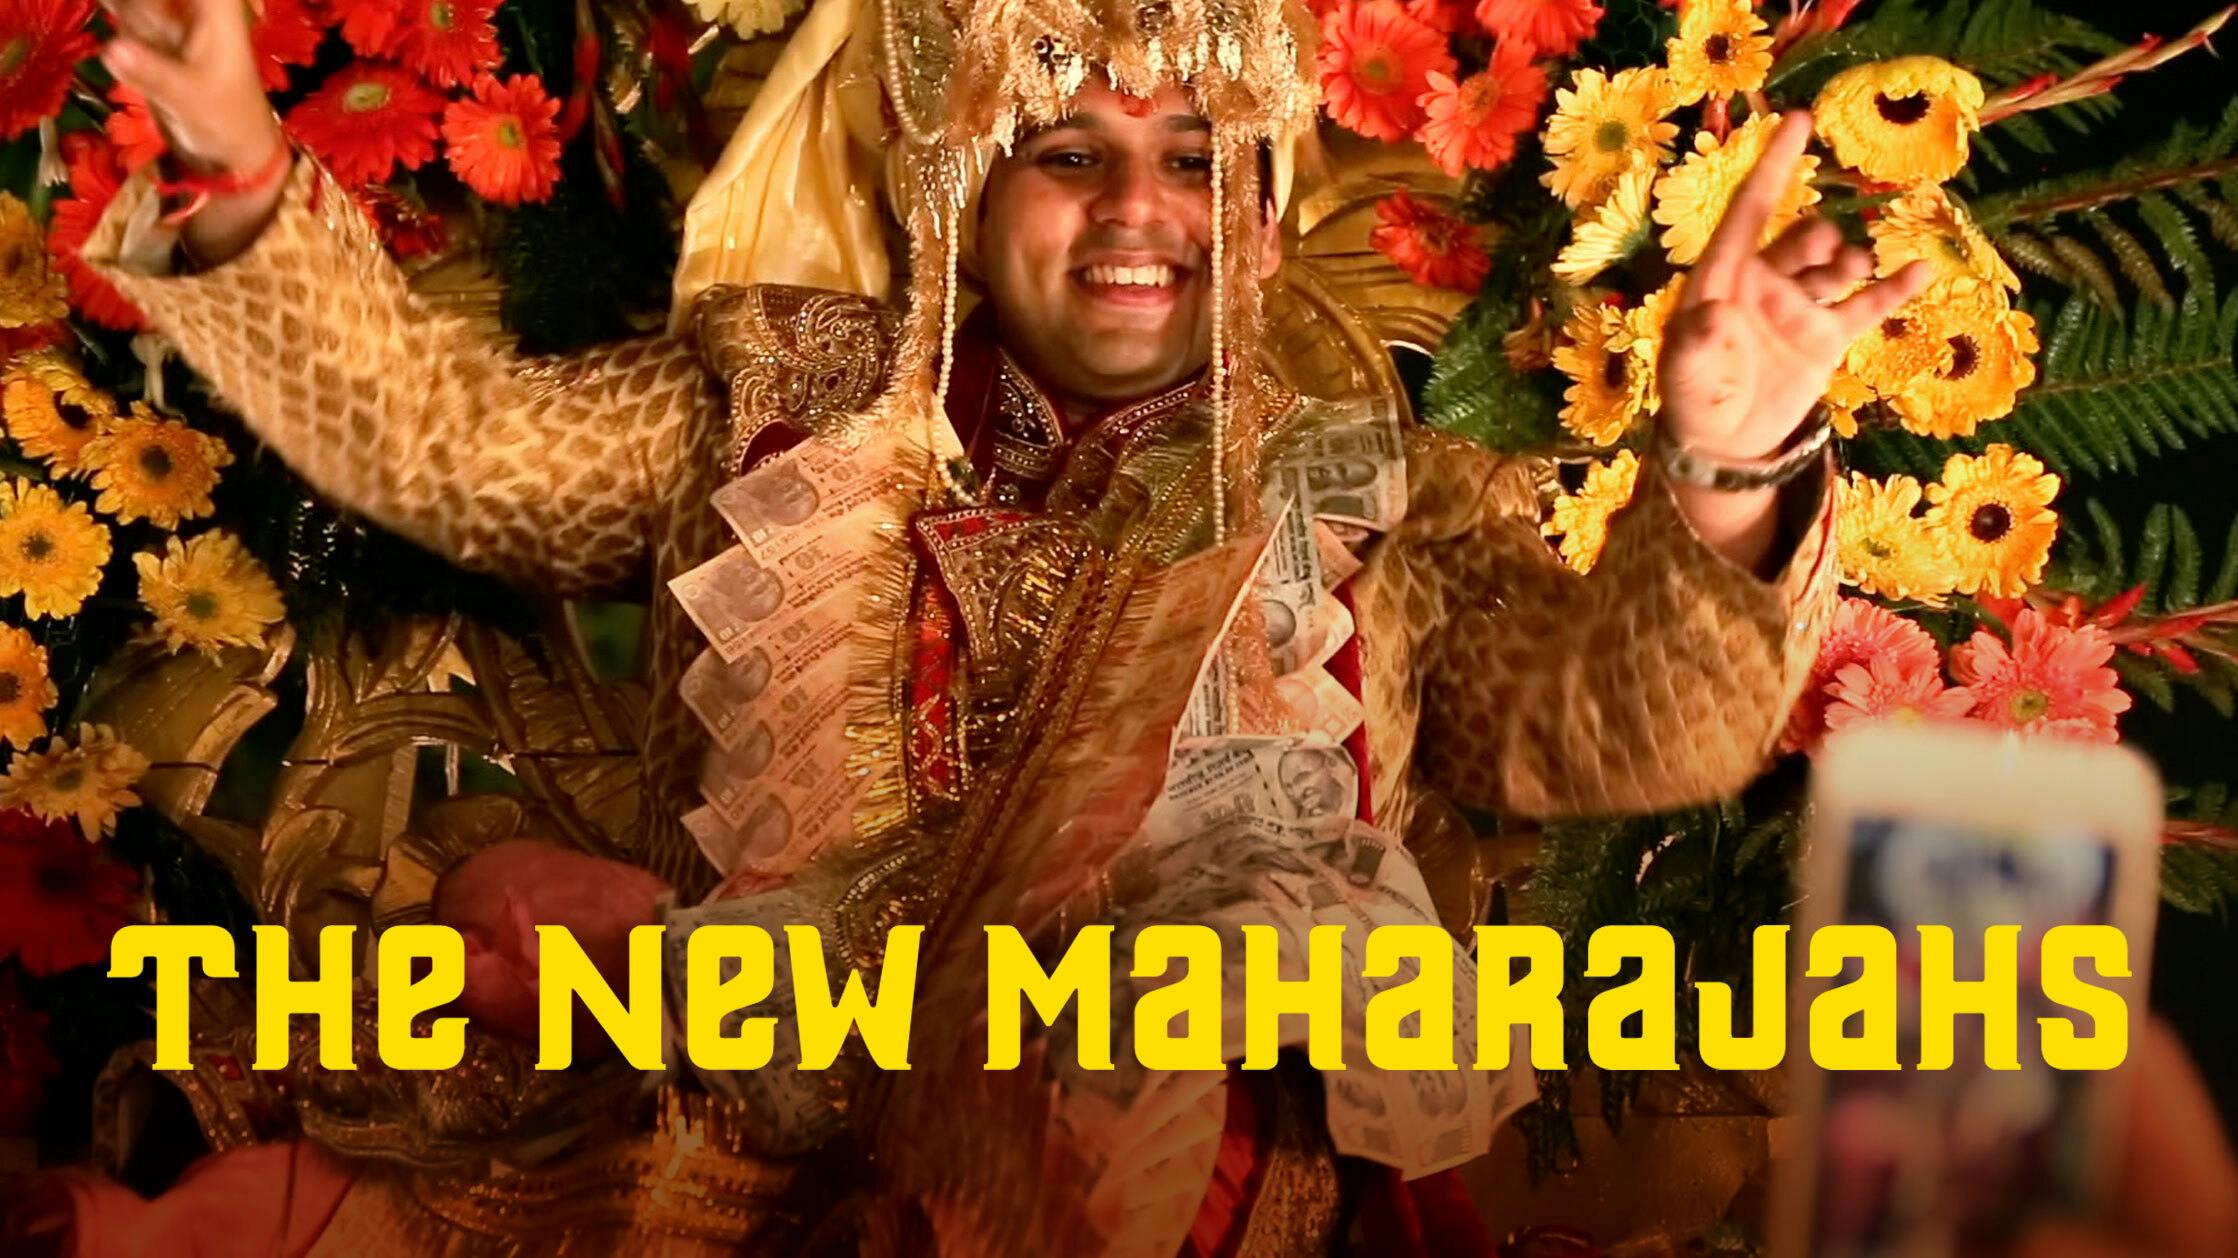 The New Maharajahs